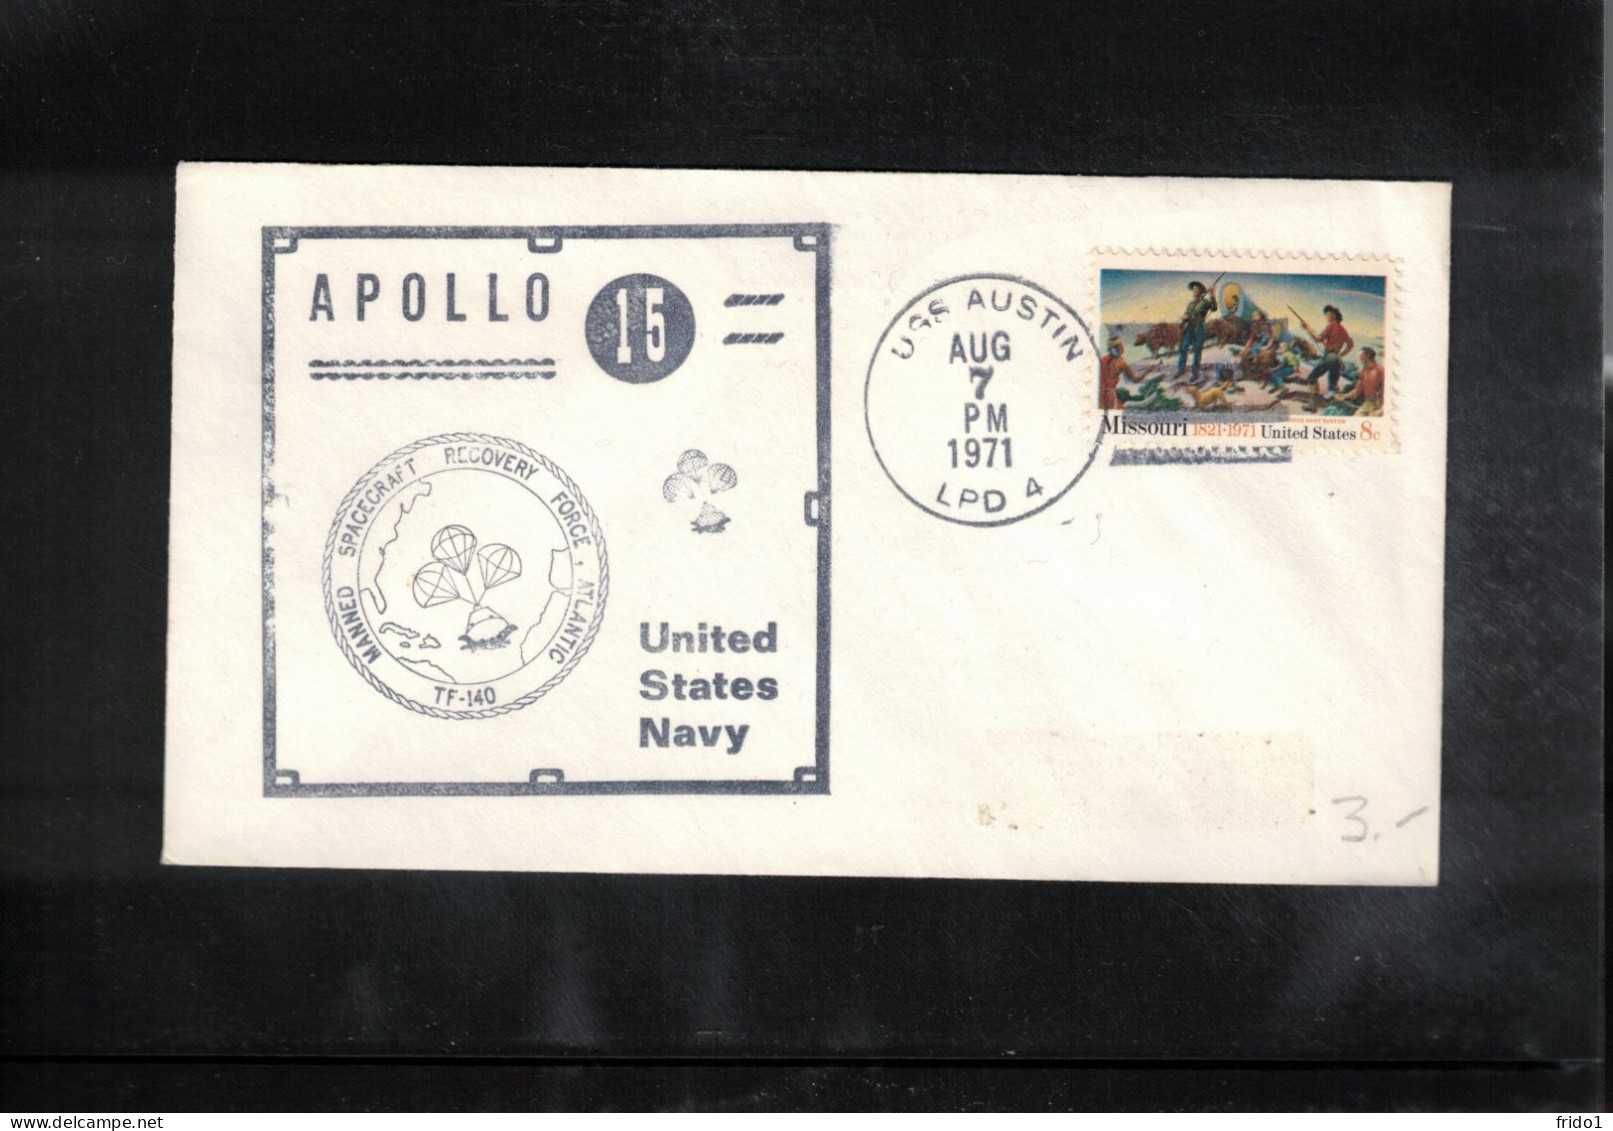 USA 1971 Space / Weltraum - Apollo 15 US Navy Recovery Force TF 140 Atlantic - USS AUSTIN Interesting Cover - USA